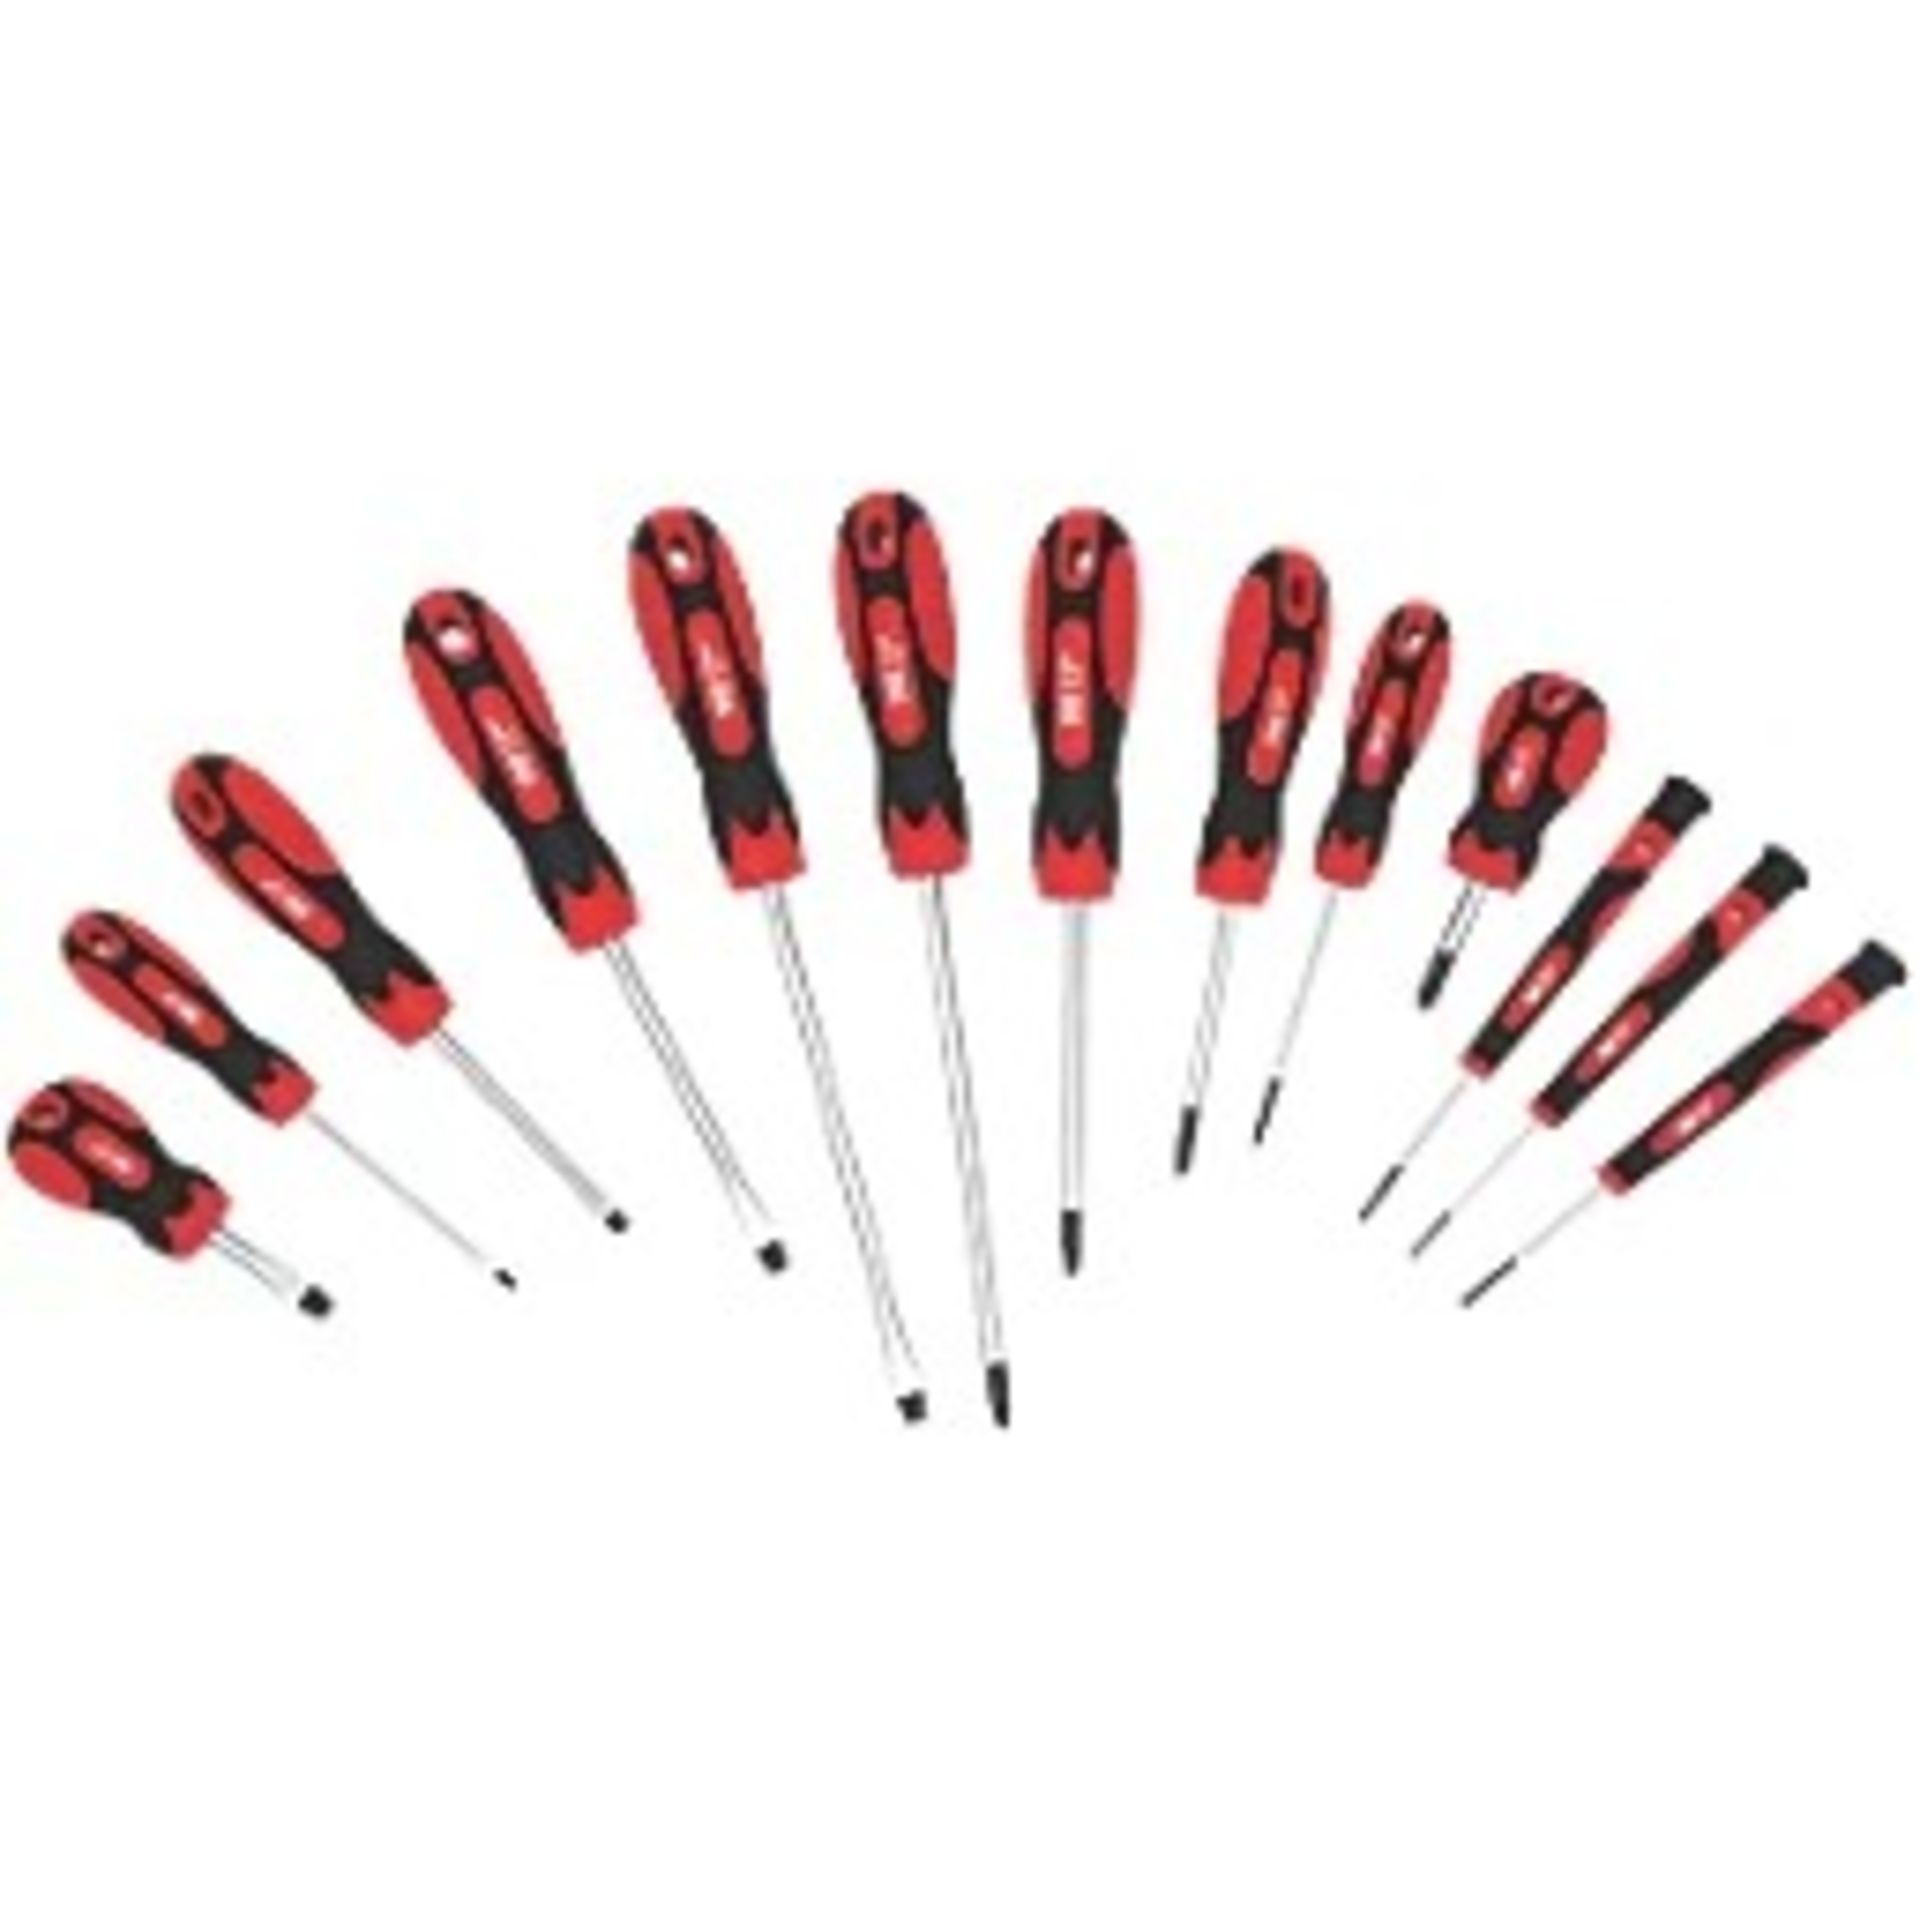 FORGE STEEL MIXED SCREWDRIVER SET 13 PIECES - ER 41